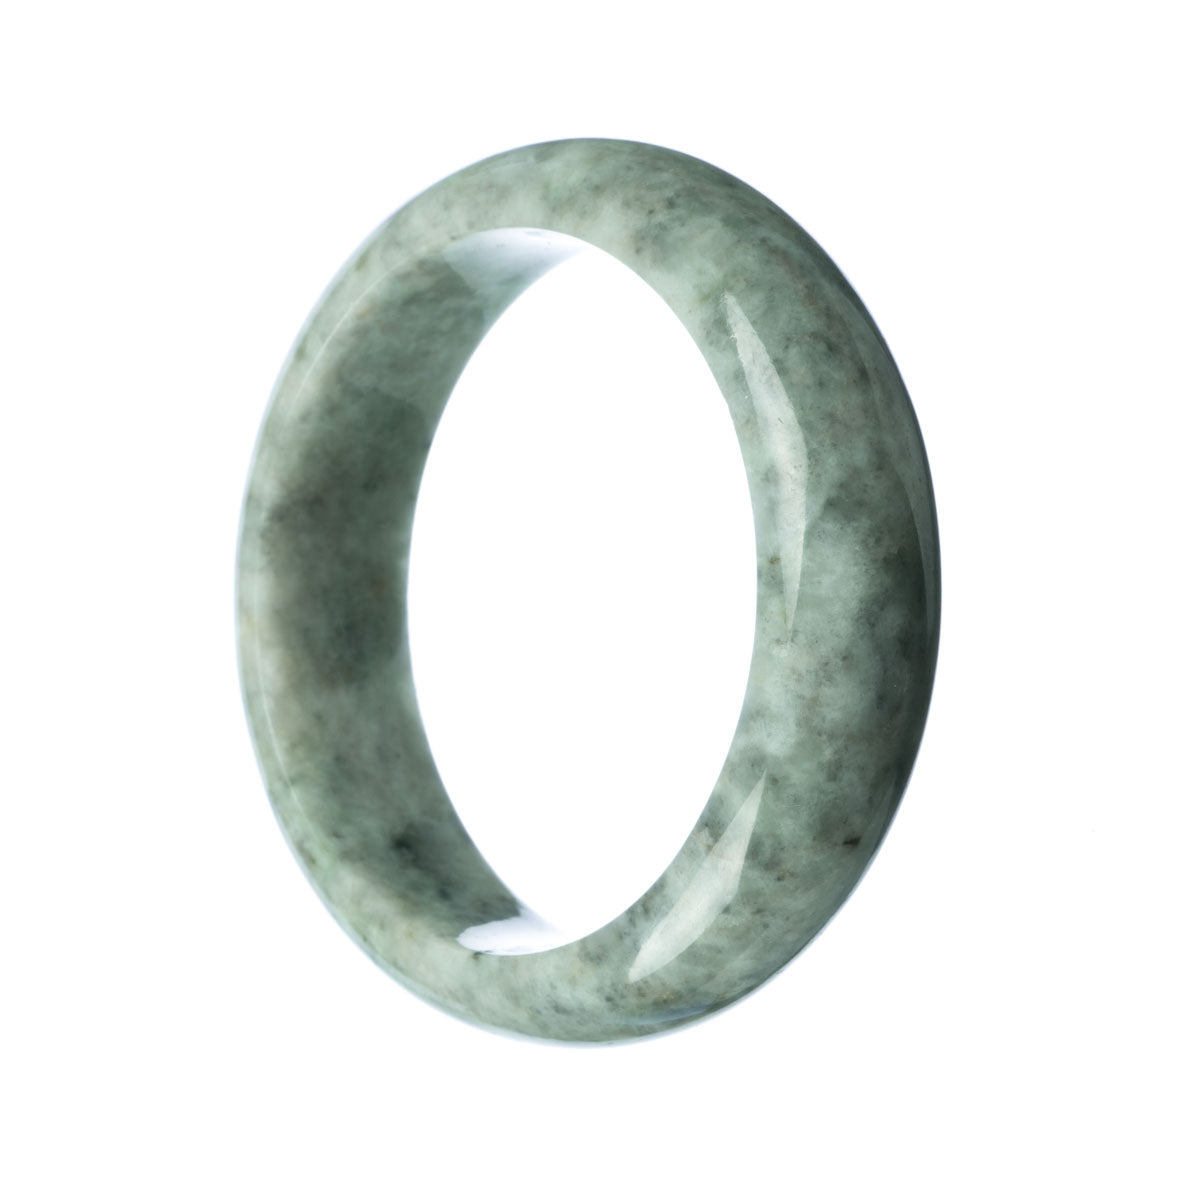 A close-up image of a gray Burmese jade bracelet in the shape of a half moon, with a smooth and polished surface. The bracelet has a genuine Grade A quality and measures 62mm in size. It is sold by MAYS GEMS.